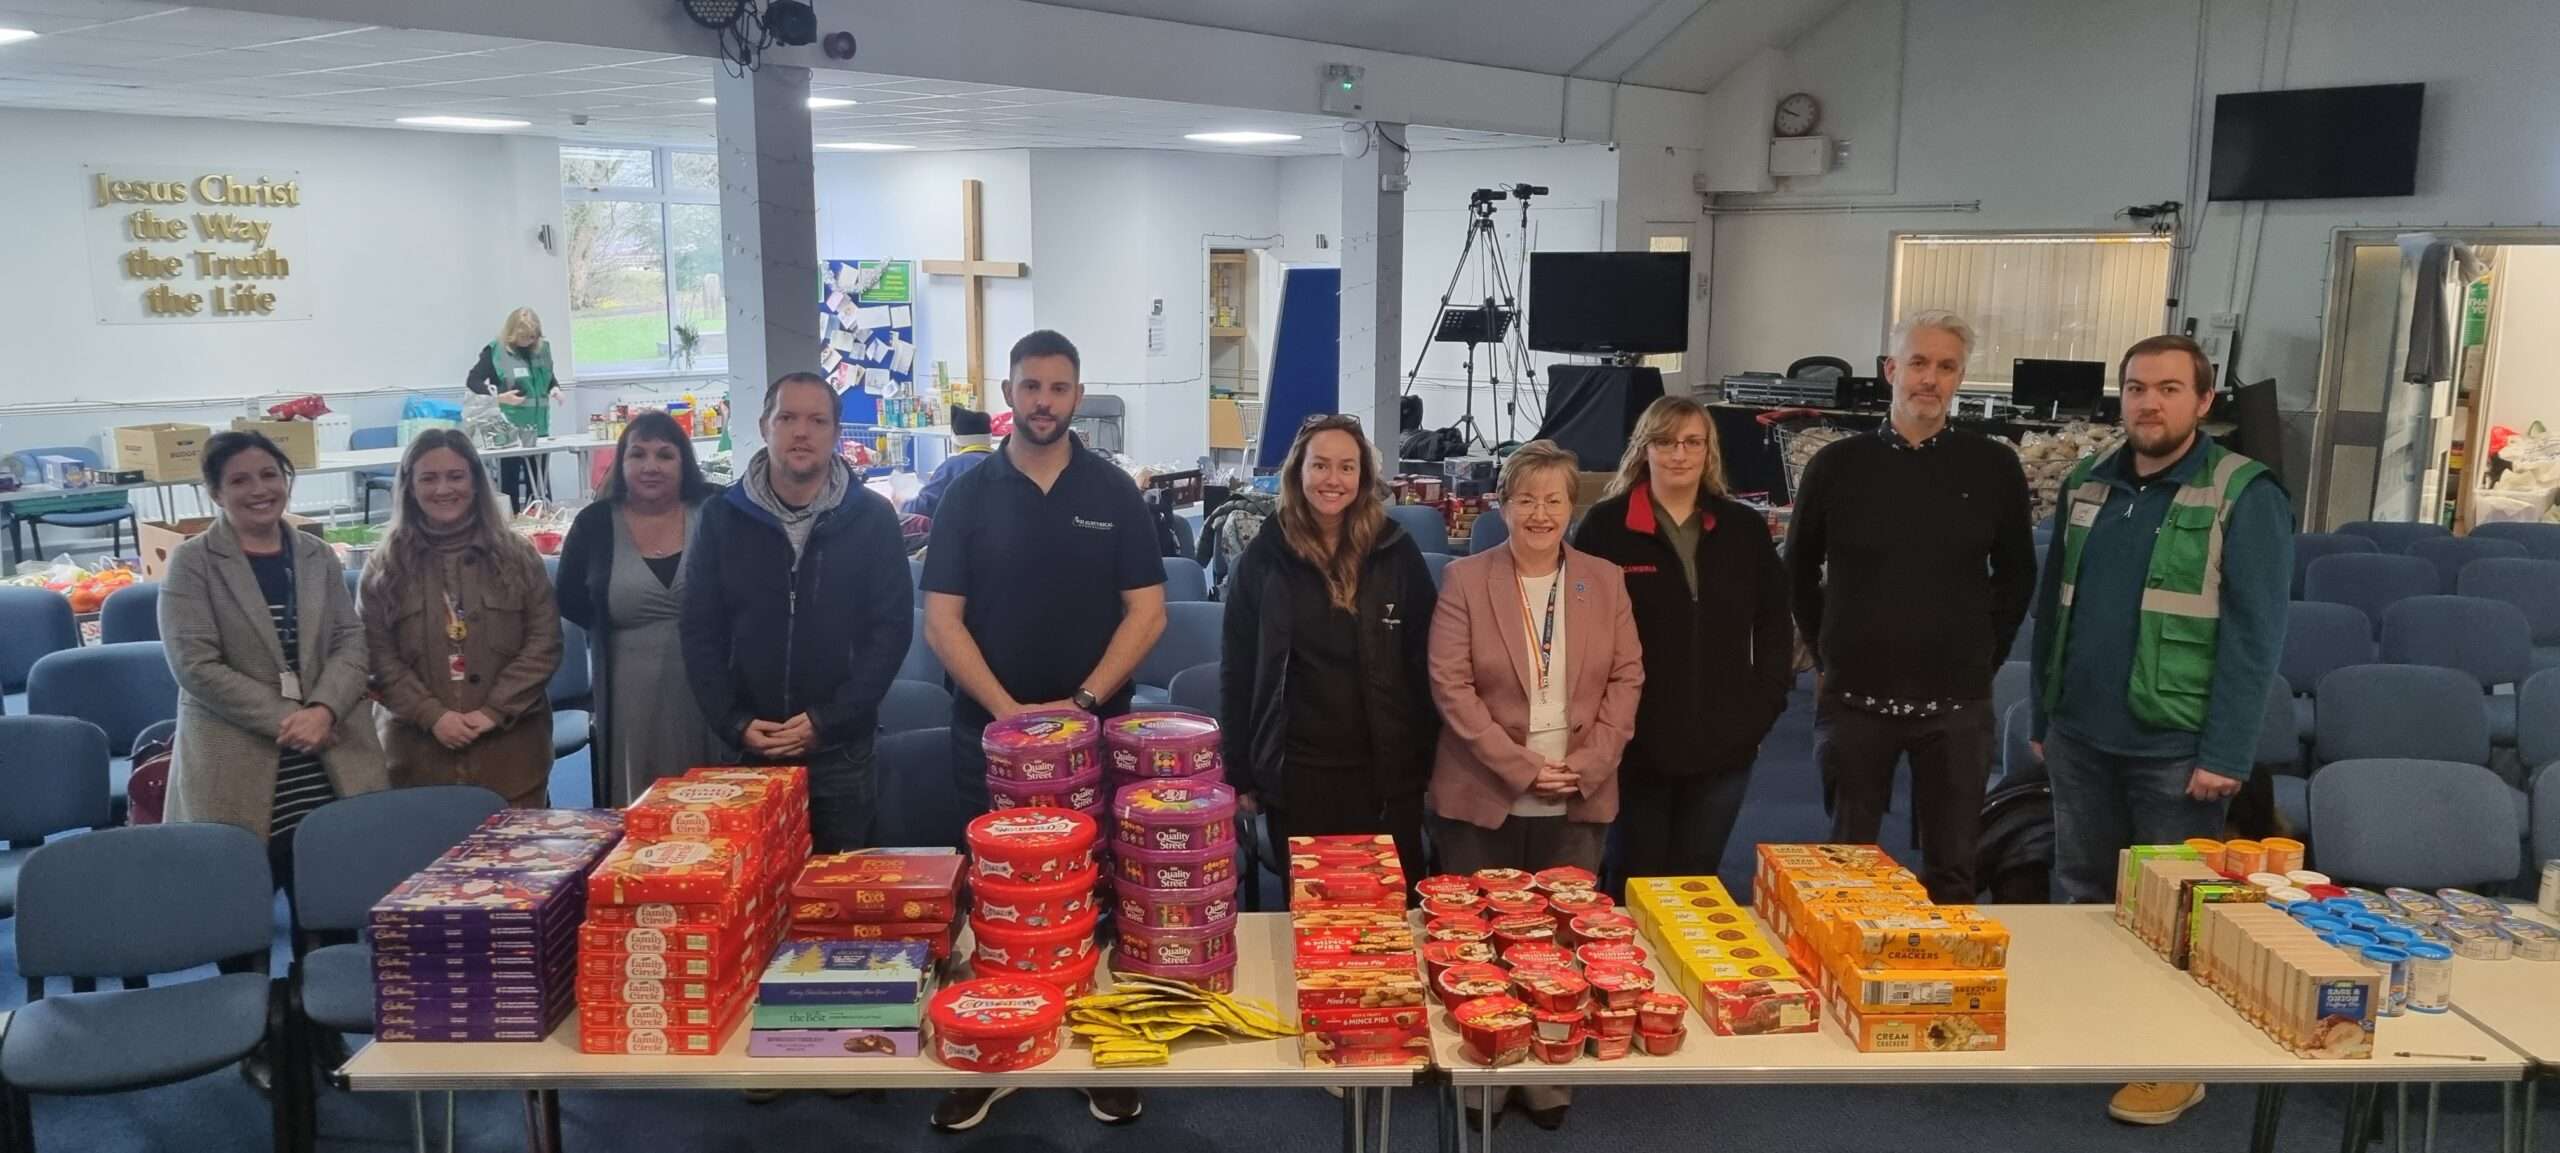 Council appeal raises £13,455 for local foodbanks across Caerphilly